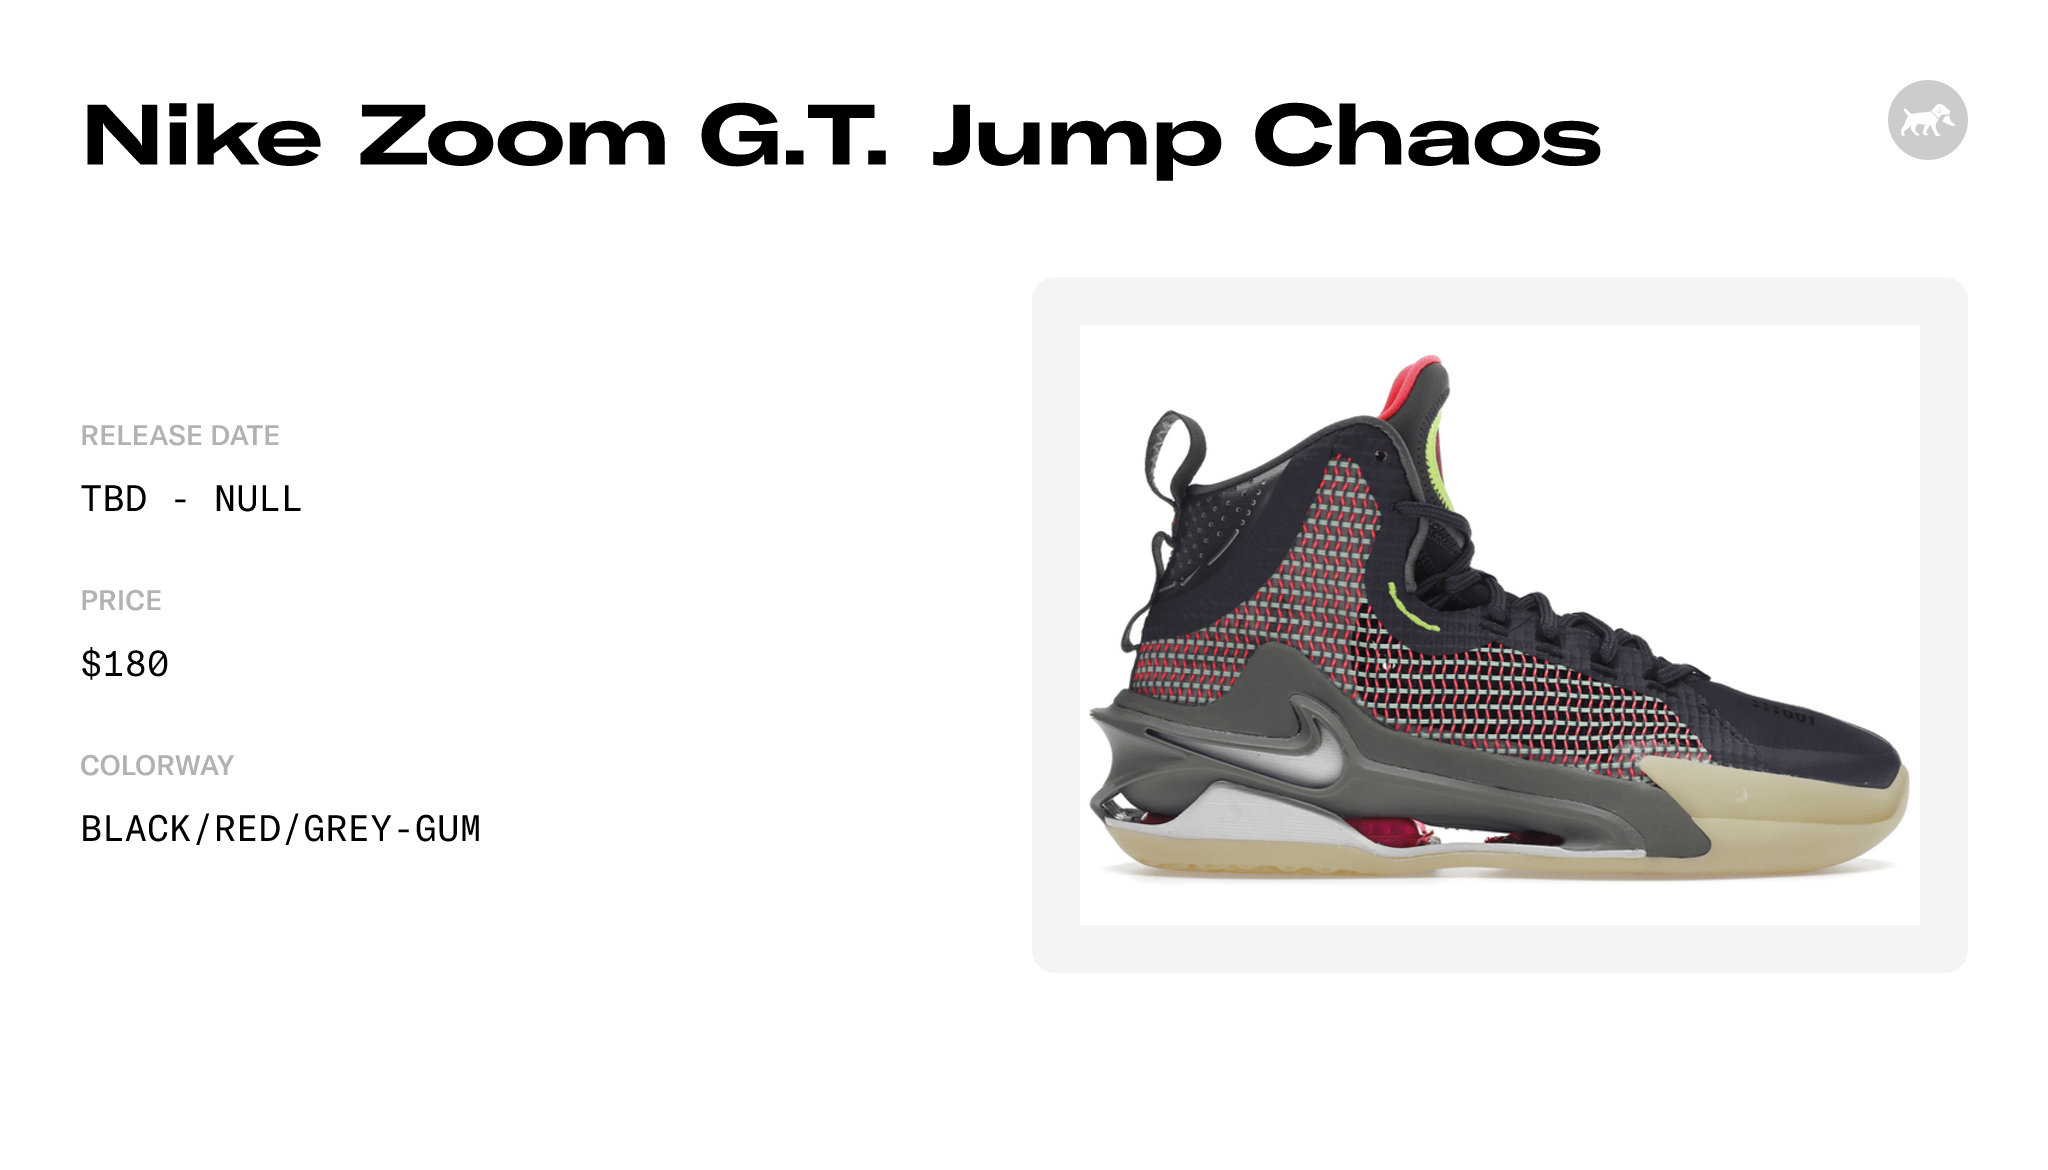 Nike Zoom G.T. Jump Chaos - CZ9907-500 Raffles and Release Date